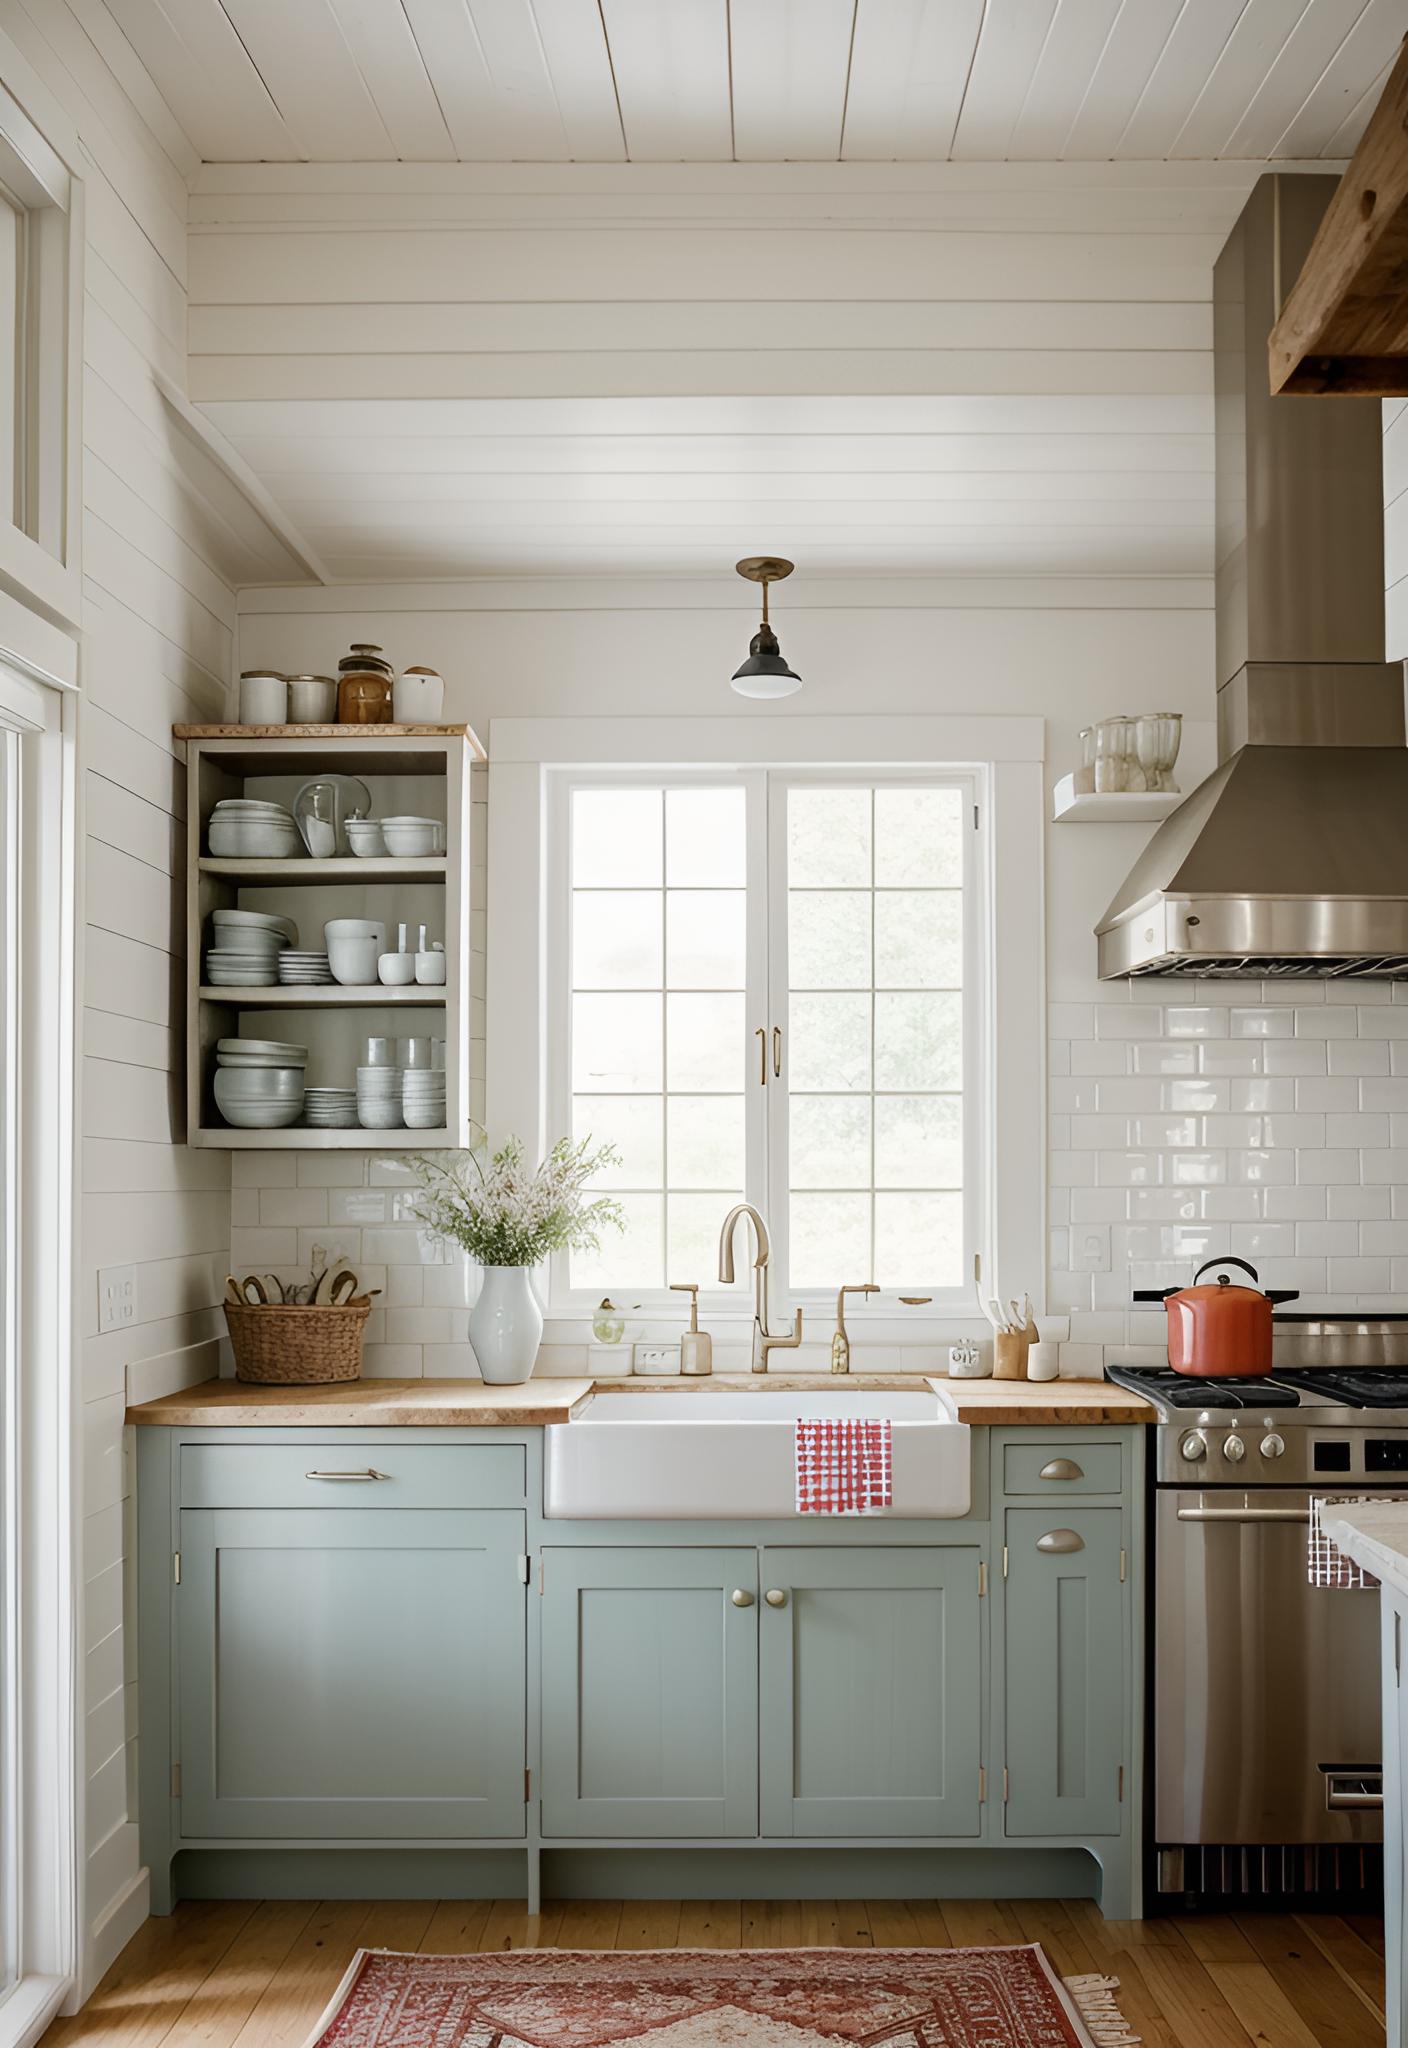 44. Charming Country Chic Kitchen Ideas-0